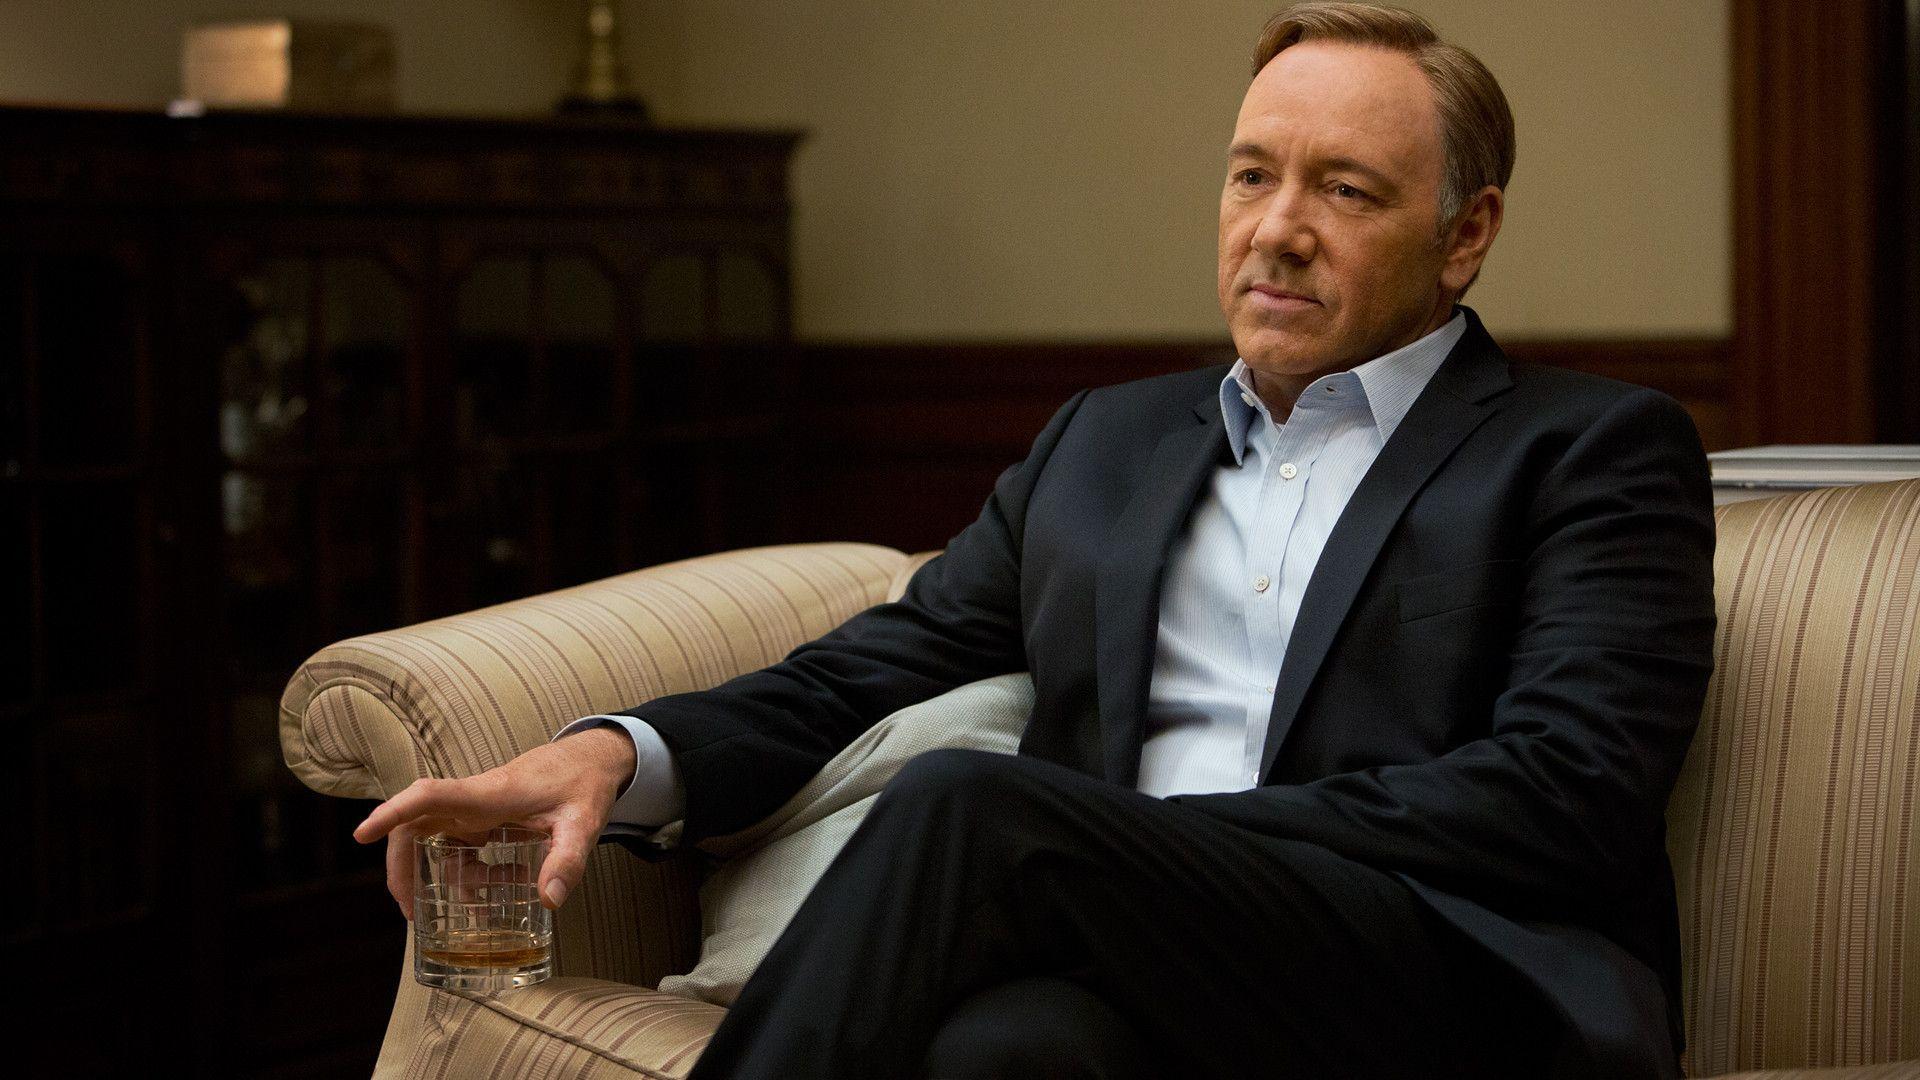 House of Cards wallpapers HD backgrounds download Facebook Covers